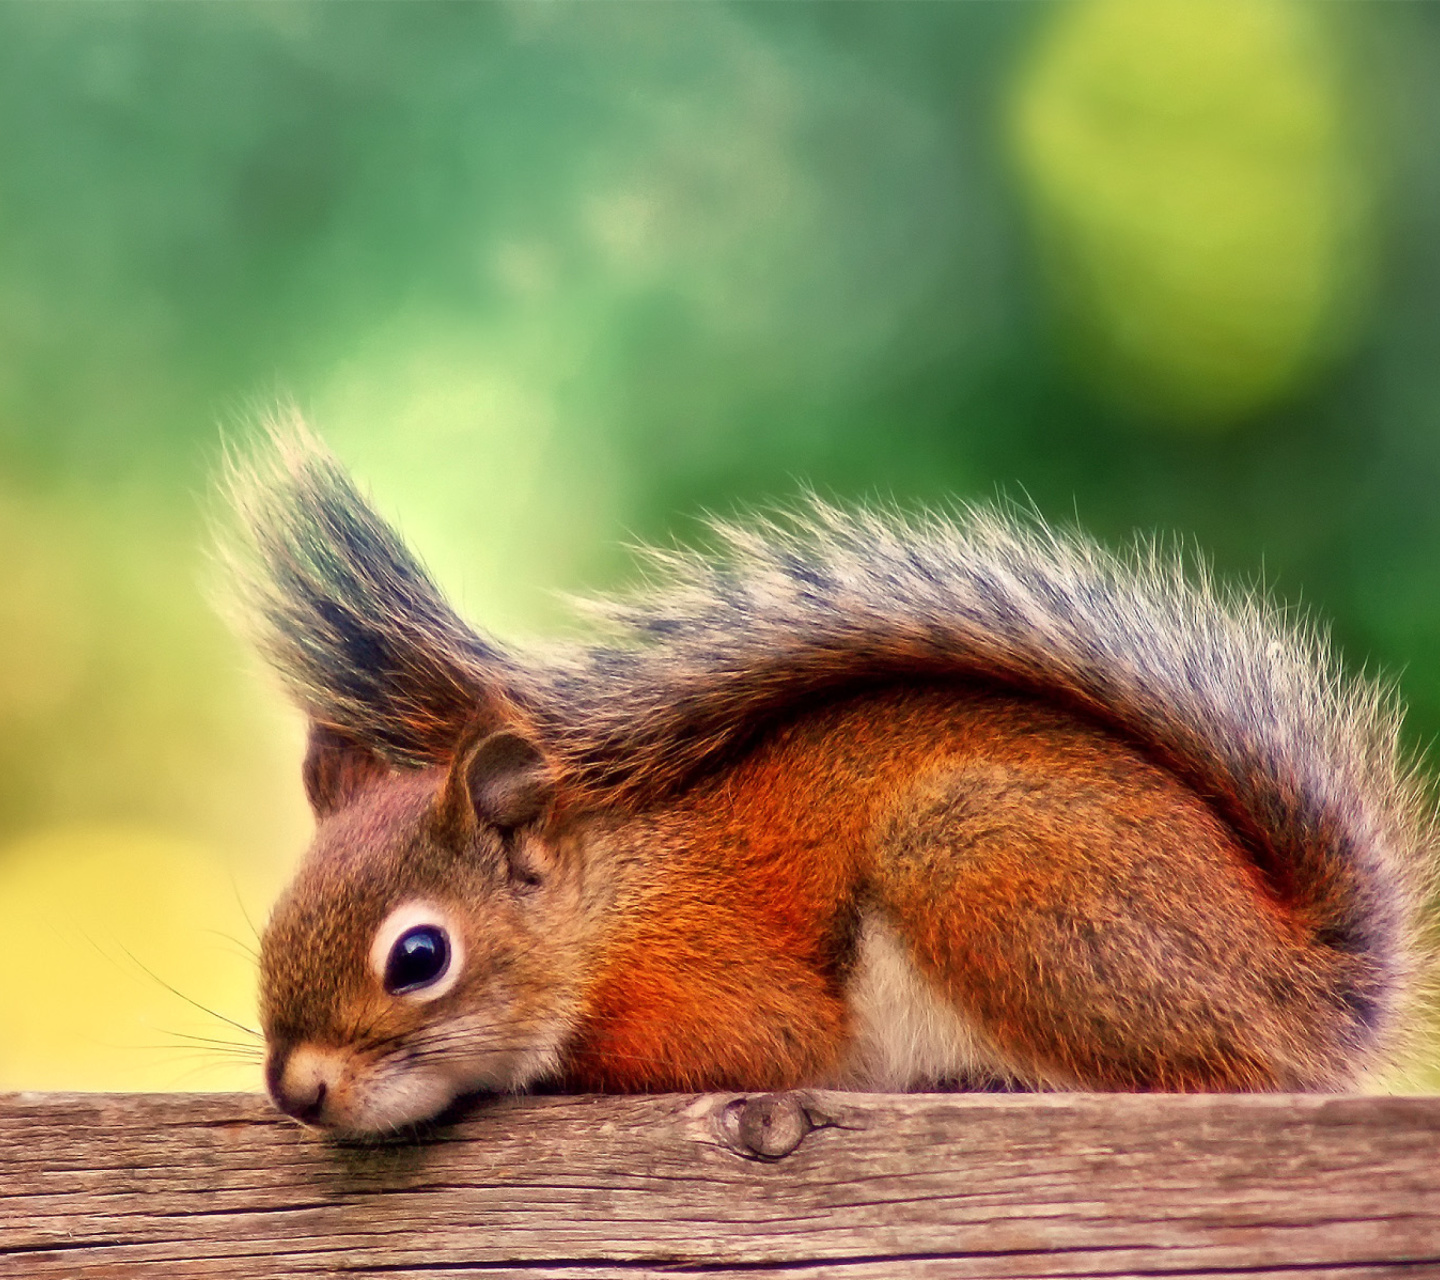 American red squirrel wallpaper 1440x1280